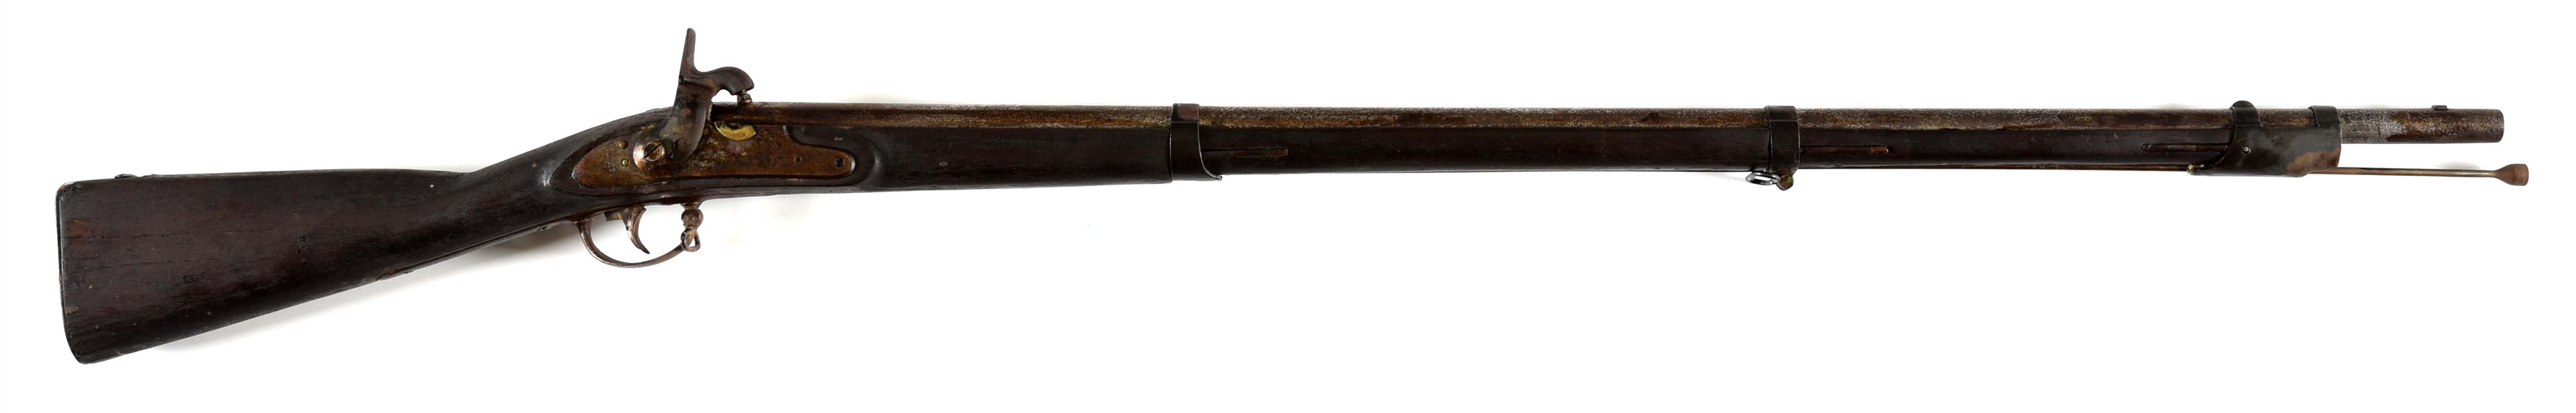 (A) SPRINGFIELD MODEL 1816 MUSKET CONVERTED TO PERCUSSION.